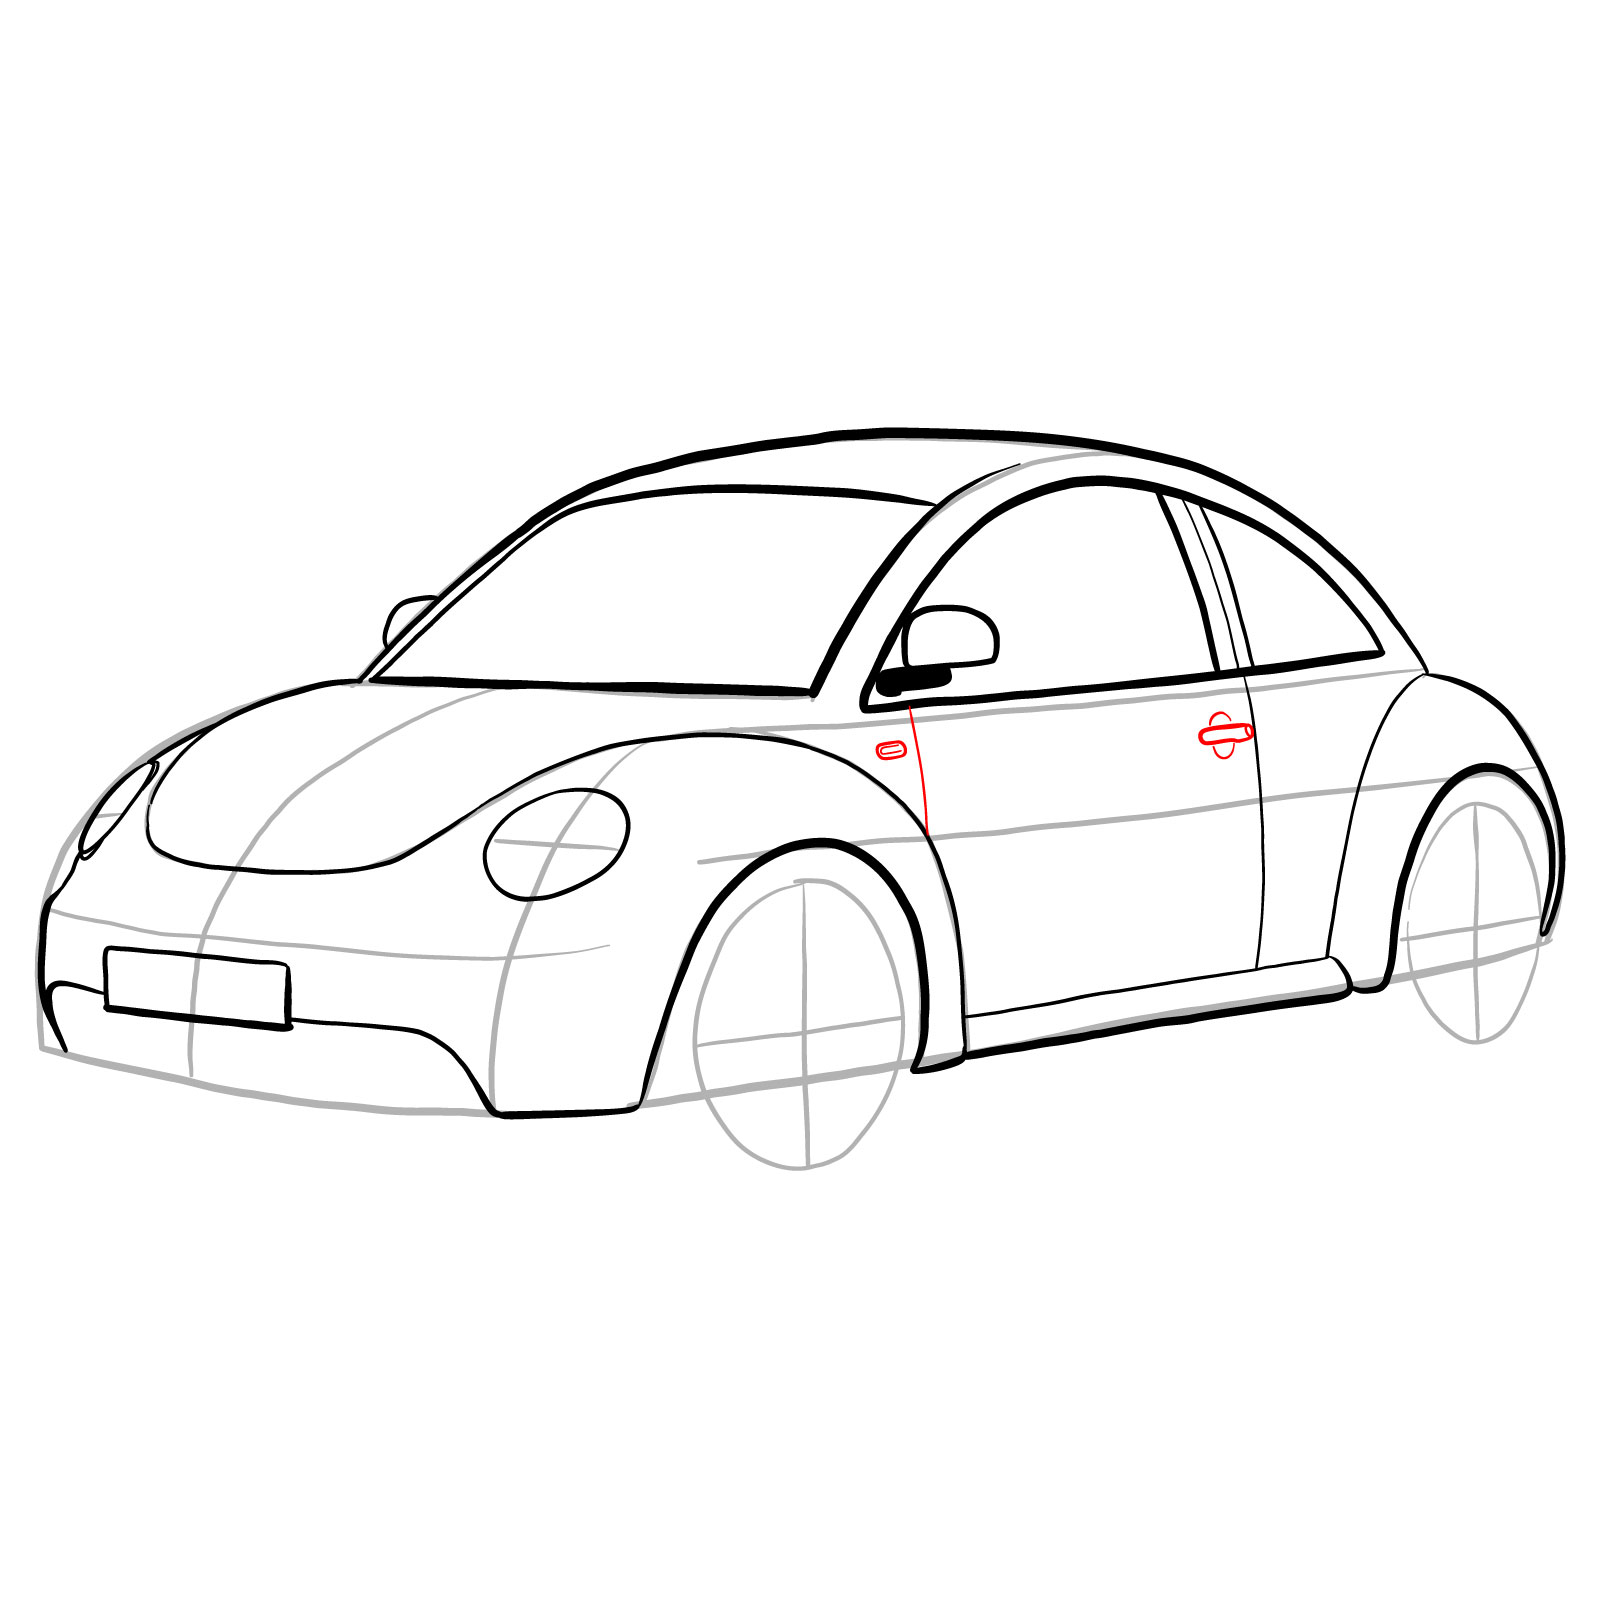 How to draw Volkswagen New Beetle - step 20